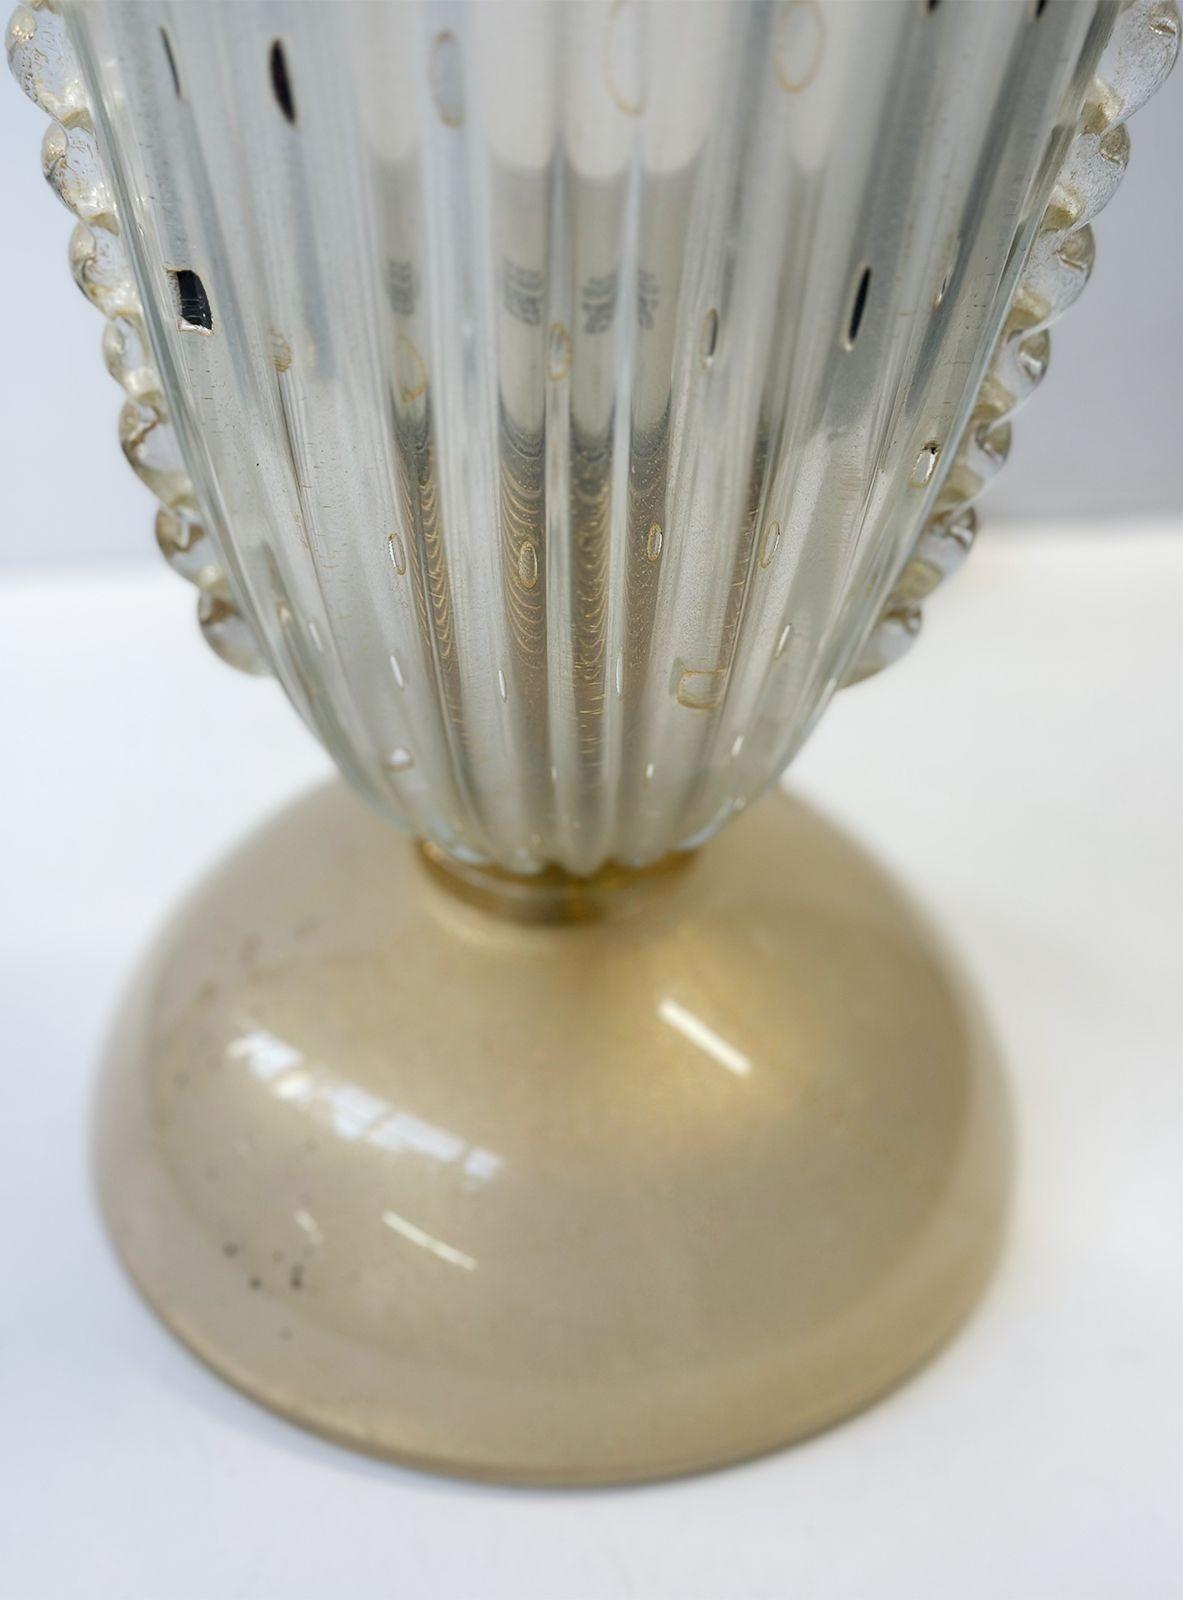 Vintage Italian Murano Table Lamp with Gold Flecks, c. 1970's For Sale 1